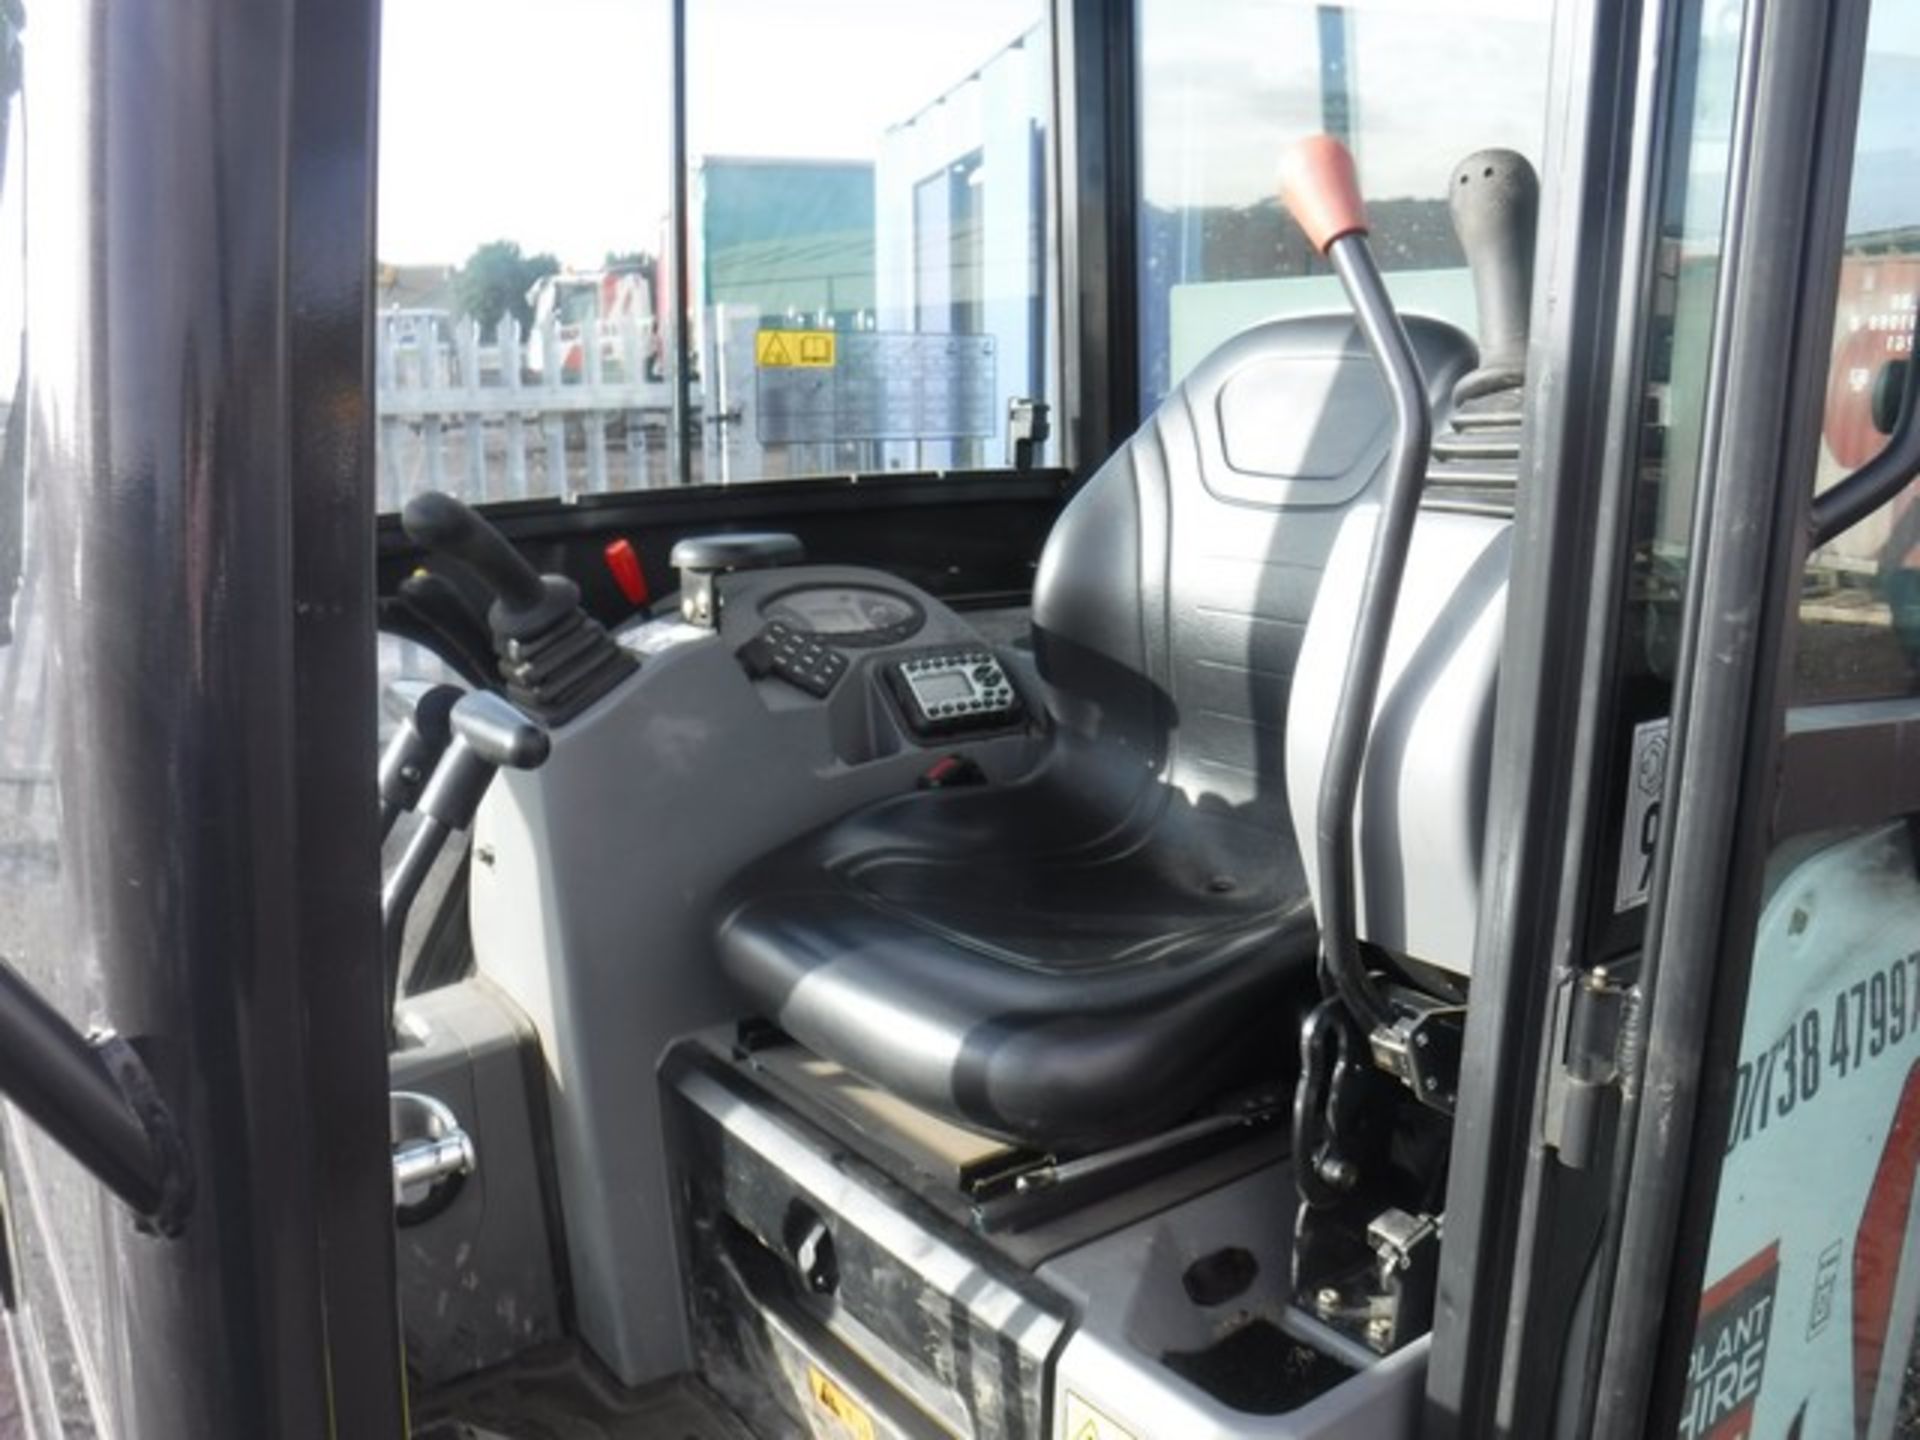 BOB CAT E17 - 2018 COMPACT EXCAVATOR WITH CAB AND BUCKET 166 HRS (NOT VERIFIED) SN - B27H12779 - Image 11 of 12